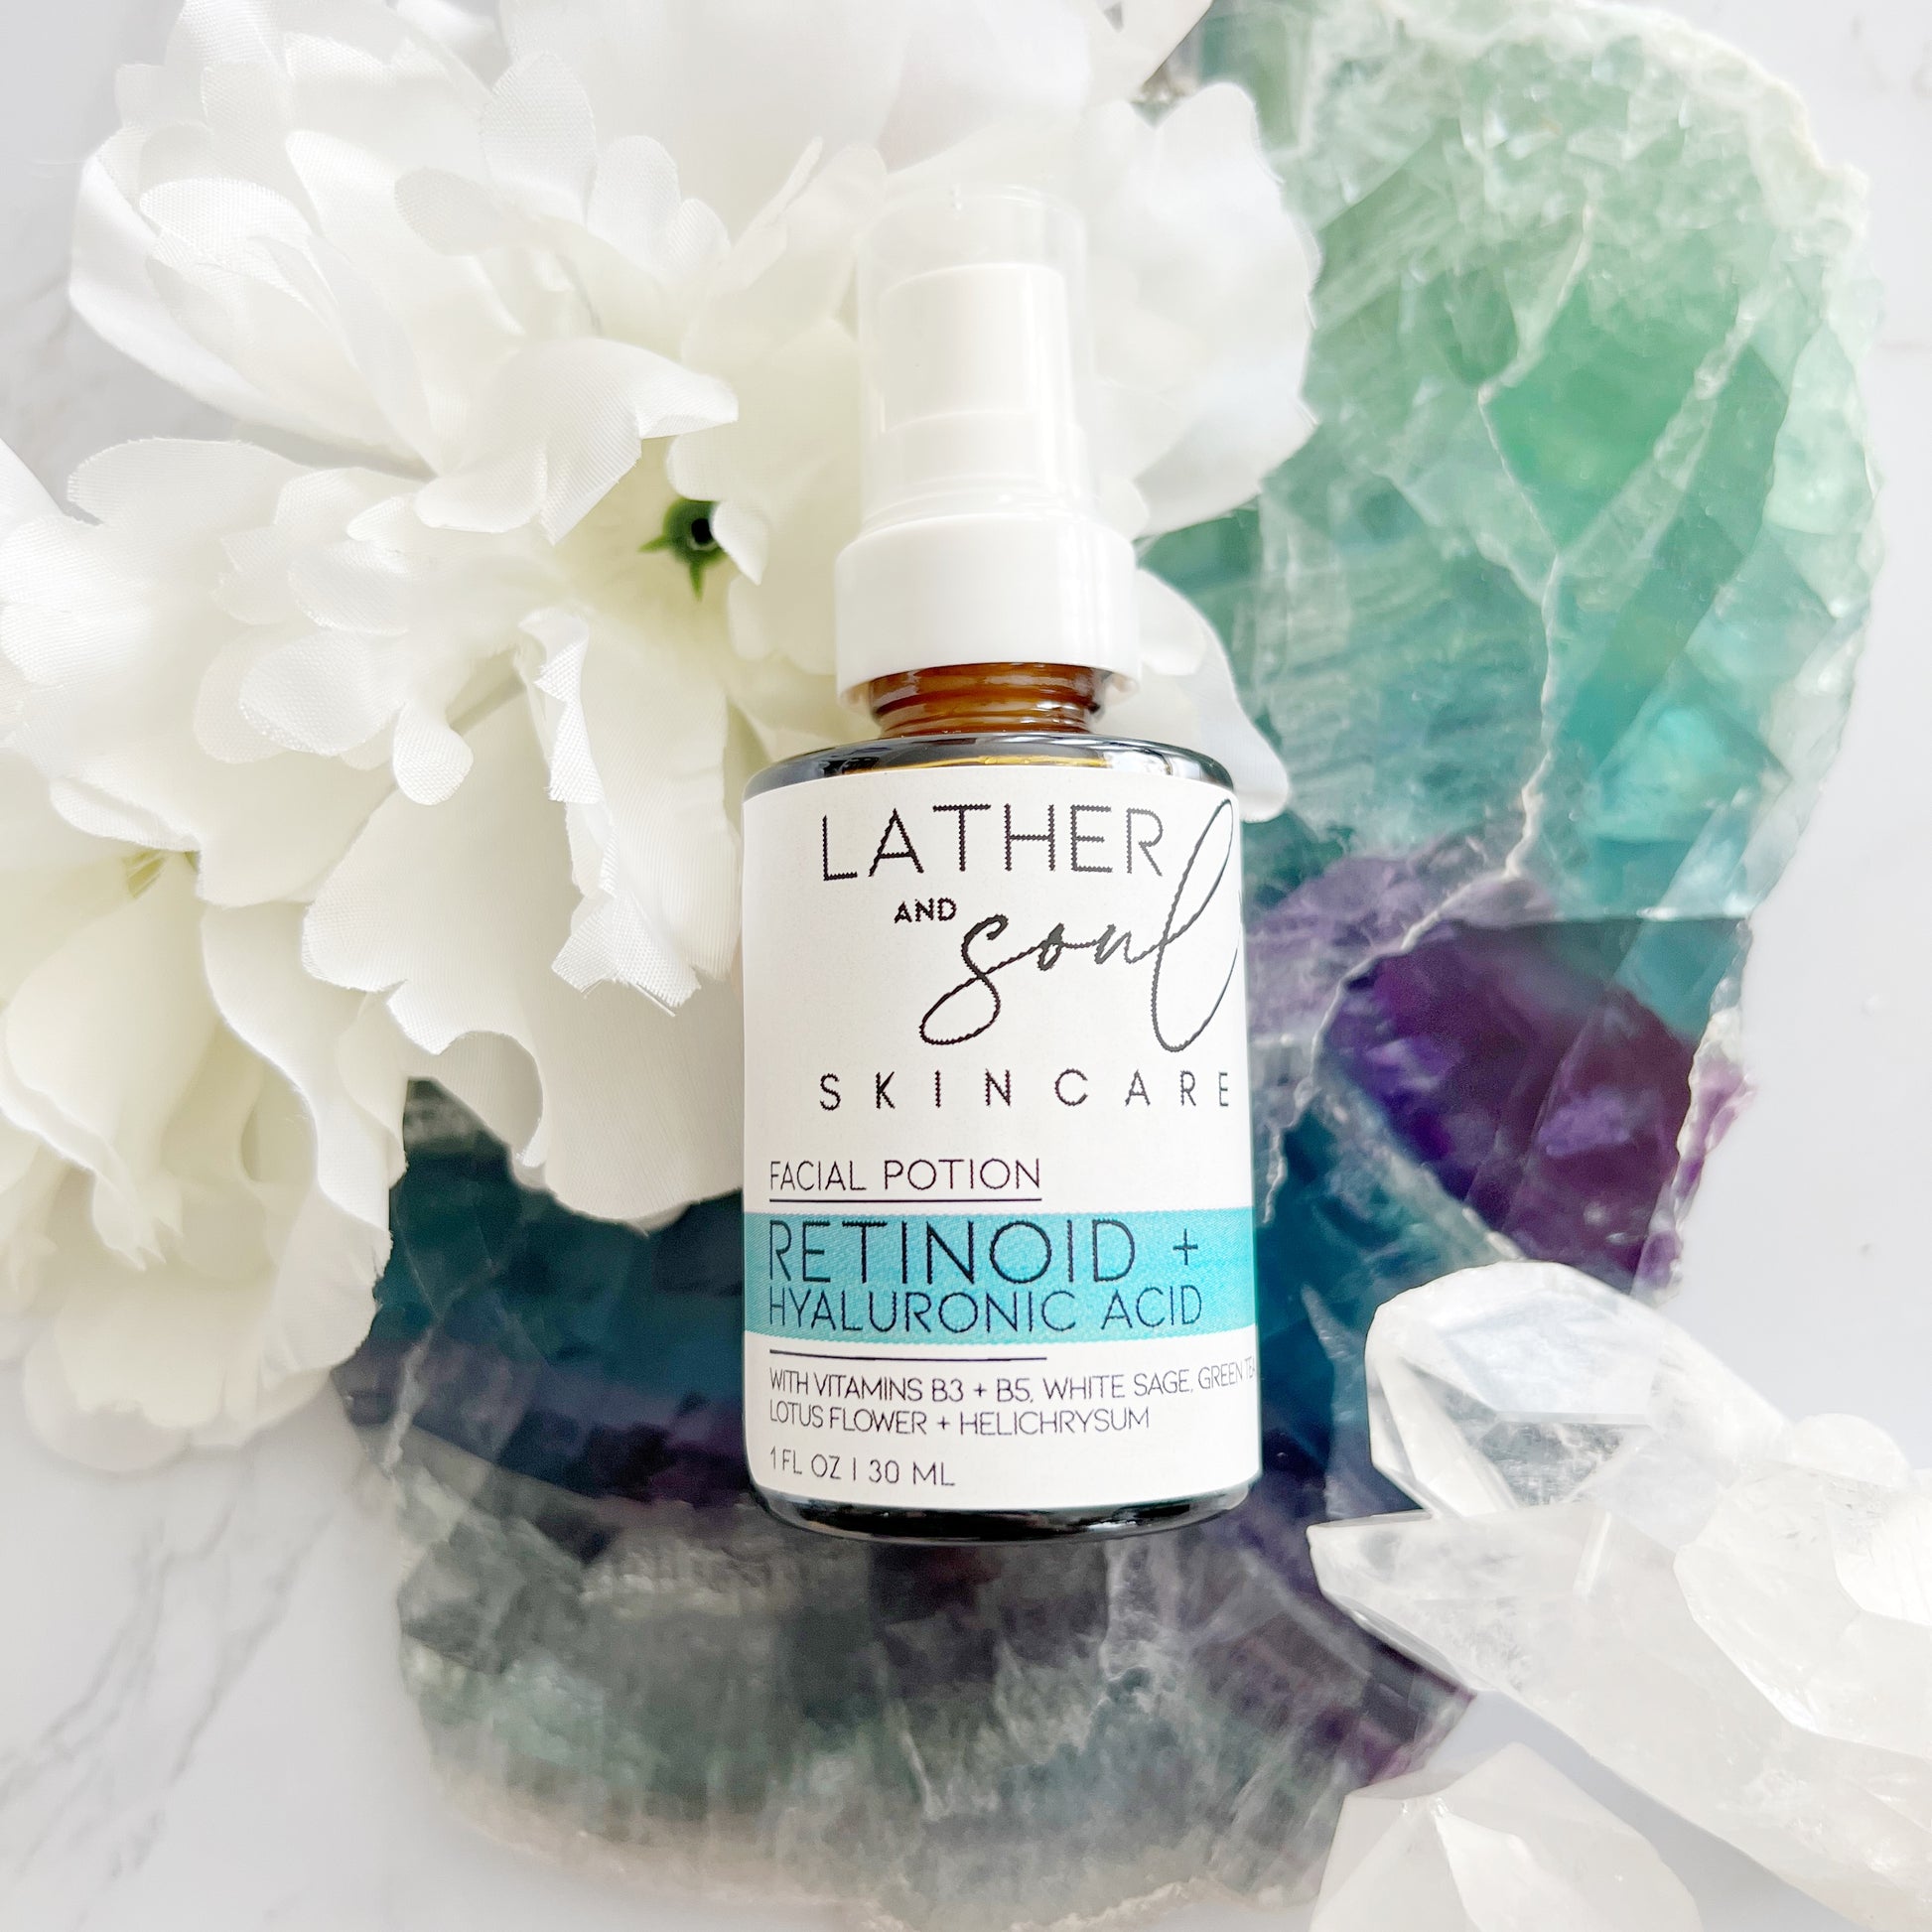 Retinoid serum from Lather and Soul Skincare